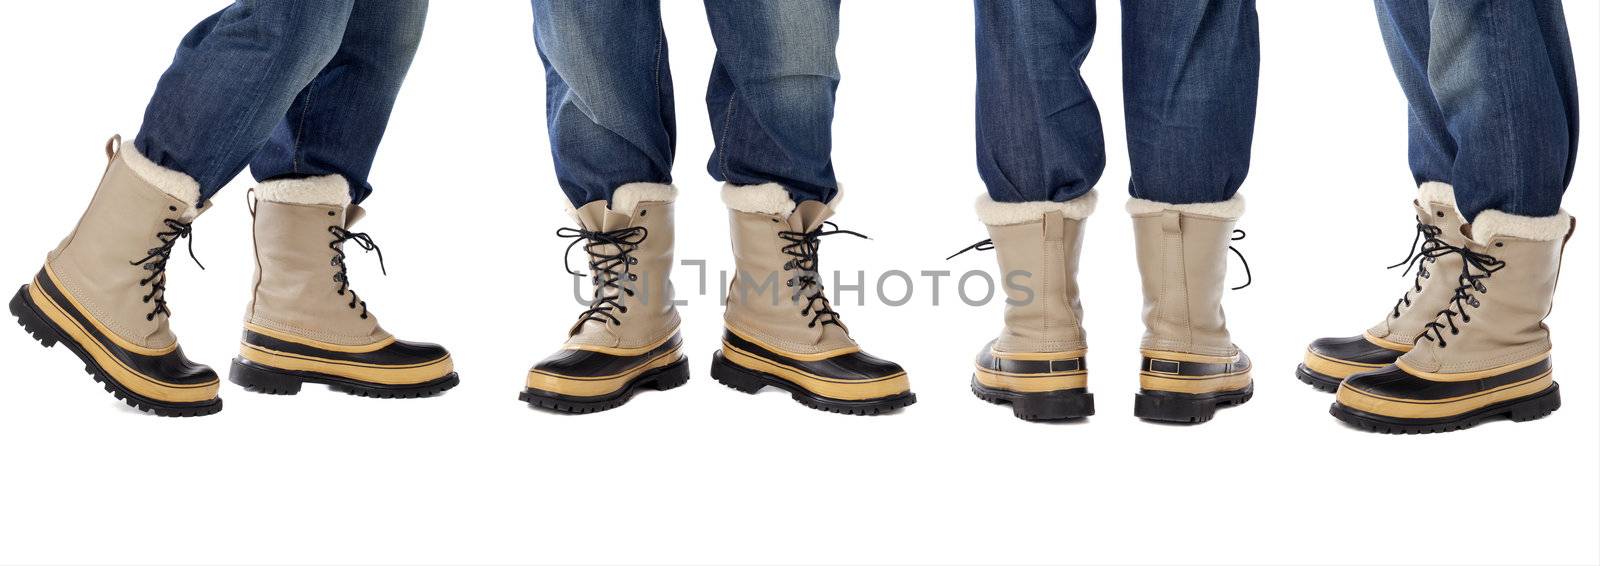 man legs in blue jeans and heavy snow boots, four poses isolated on white